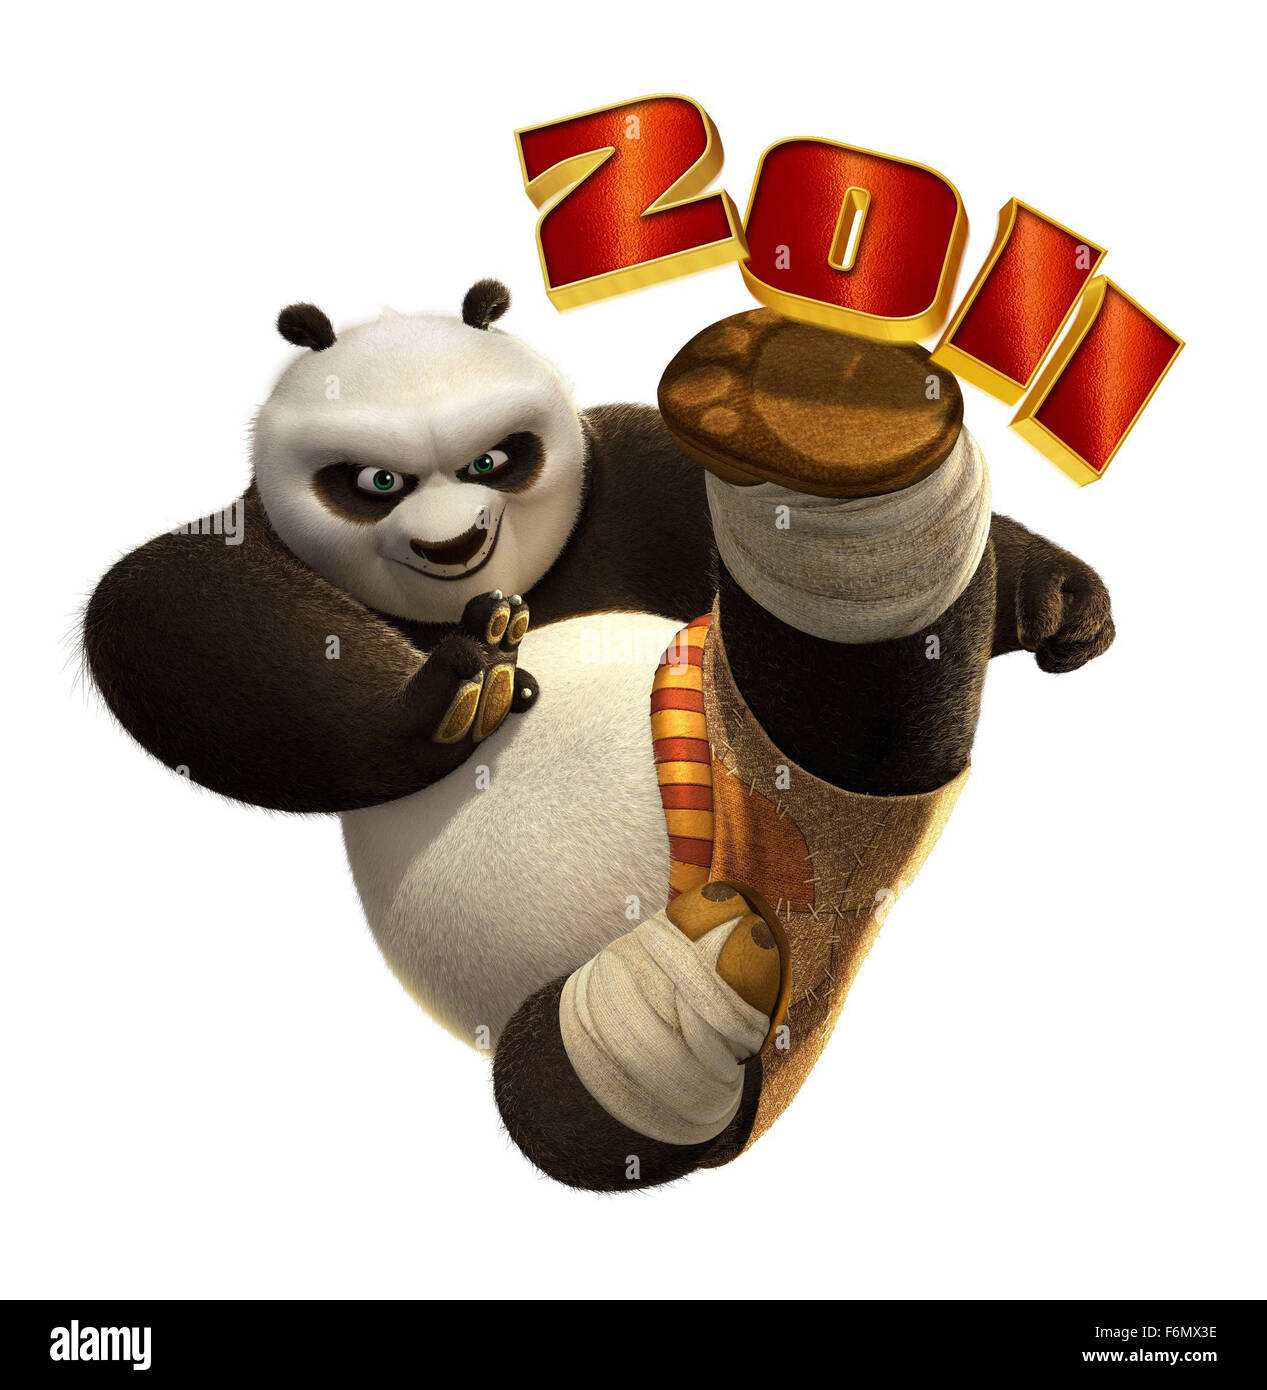 RELEASE DATE: May 26 2011   TITLE: Kung Fu Panda 2   STUDIO: Dreamworks Animation   DIRECTOR: Jennifer Yuh   PLOT: Po joins forces with a group of new kung-fu masters to take on an old enemy with a deadly new weapon   PICTURED: Jack Black as Po (voice)  (Credit Image: c DreamWorks Animation/Entertainment Pictures) Stock Photo